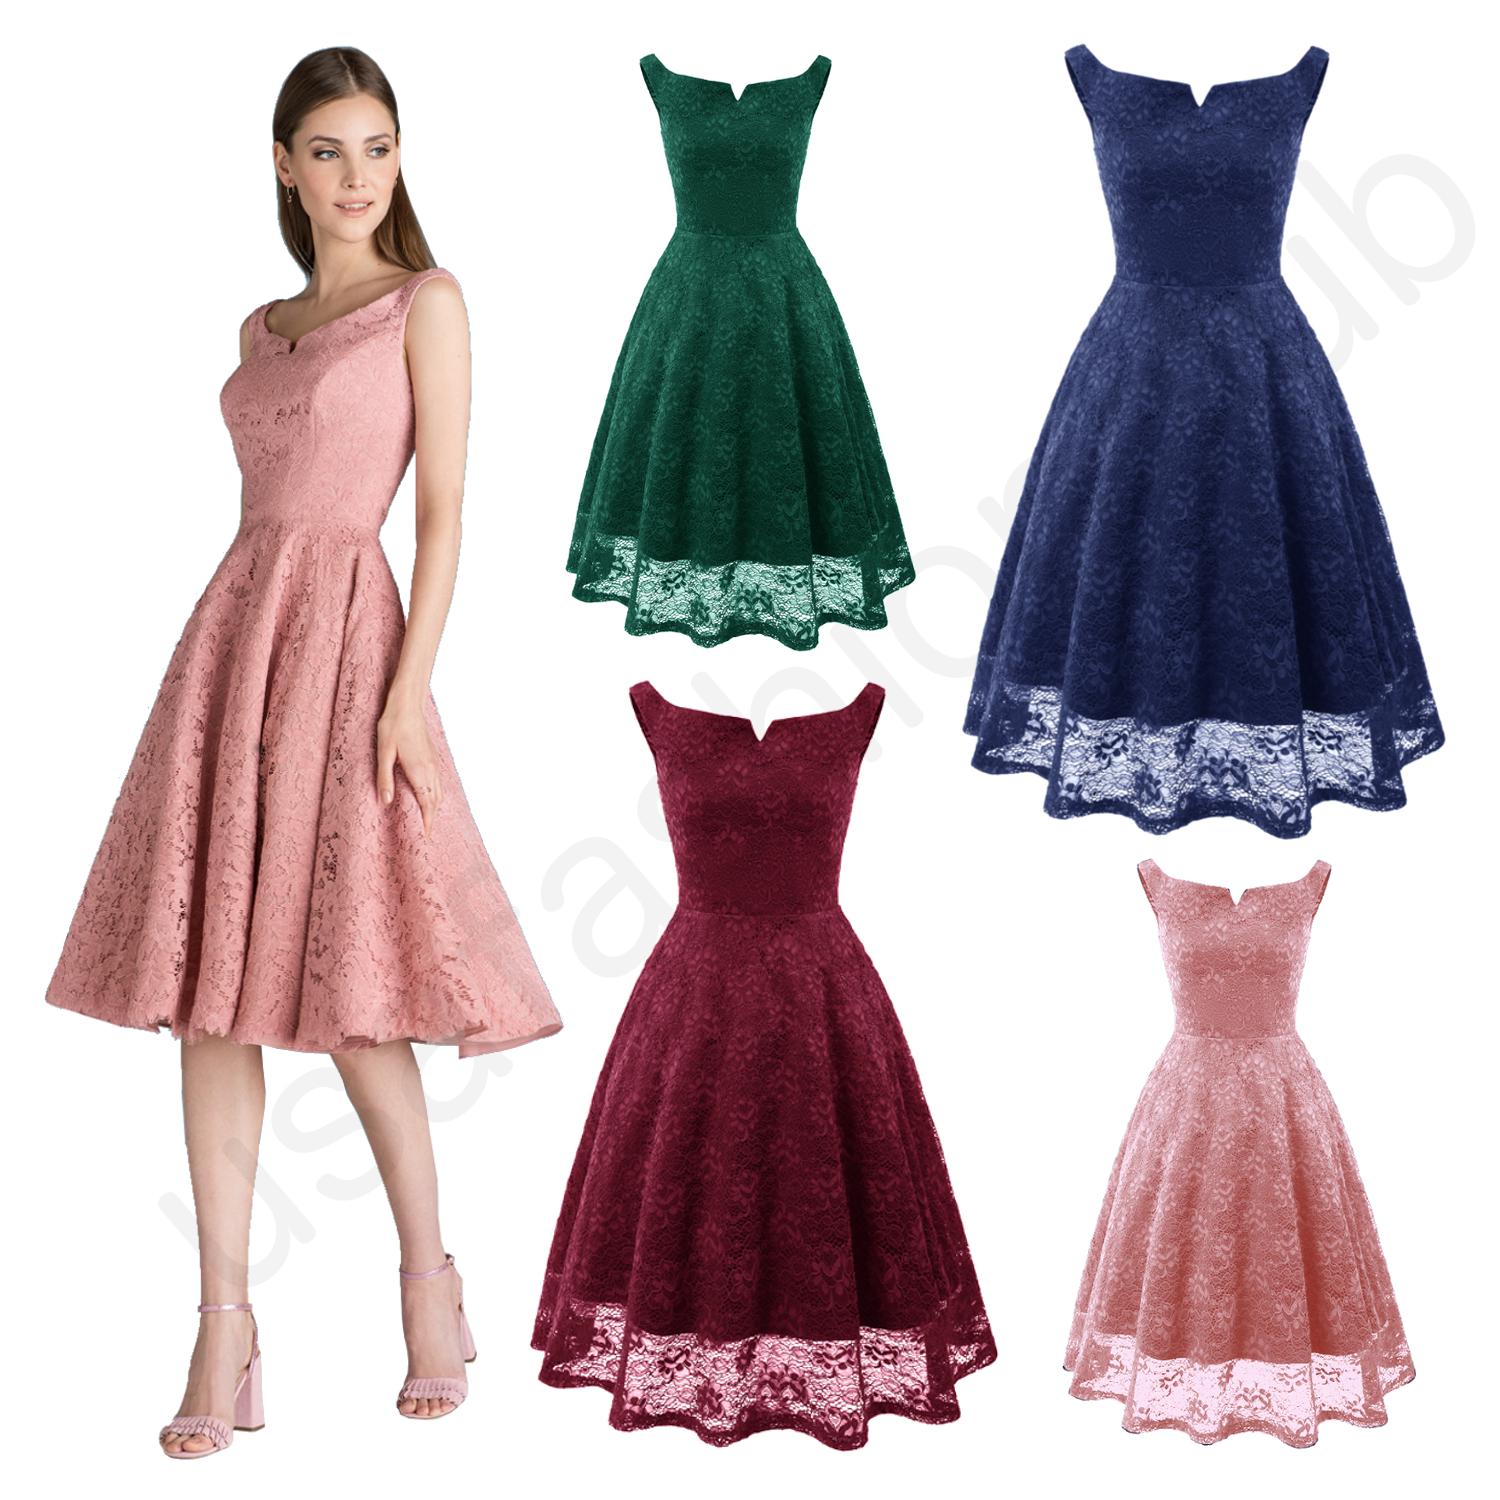 Women's New Vintage Boat Neck Lace Formal Wedding Cocktail Evening Party Dresses: Women Sleeveless Dress,  Beach outfit  